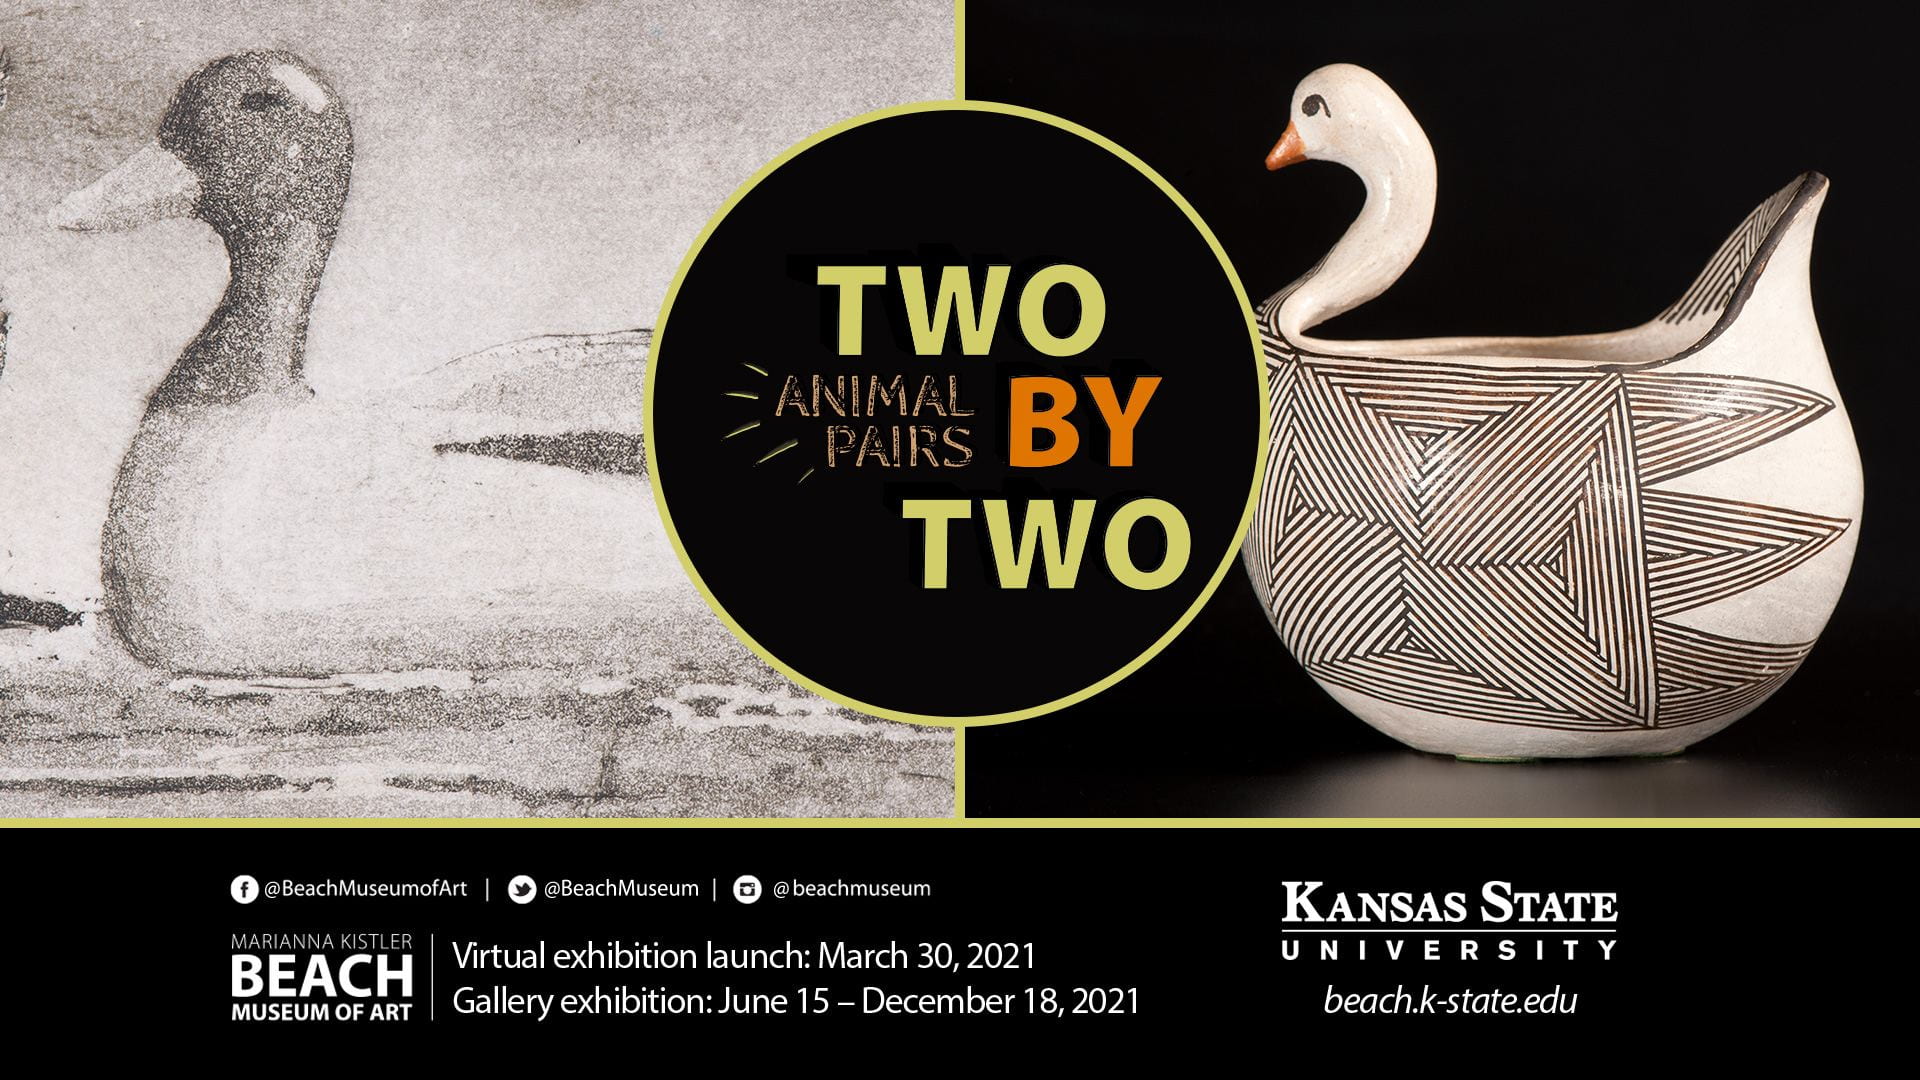 Publicity image for the exhibition "Two by Two: Animal Pairs" by the Beach Museum of Art.